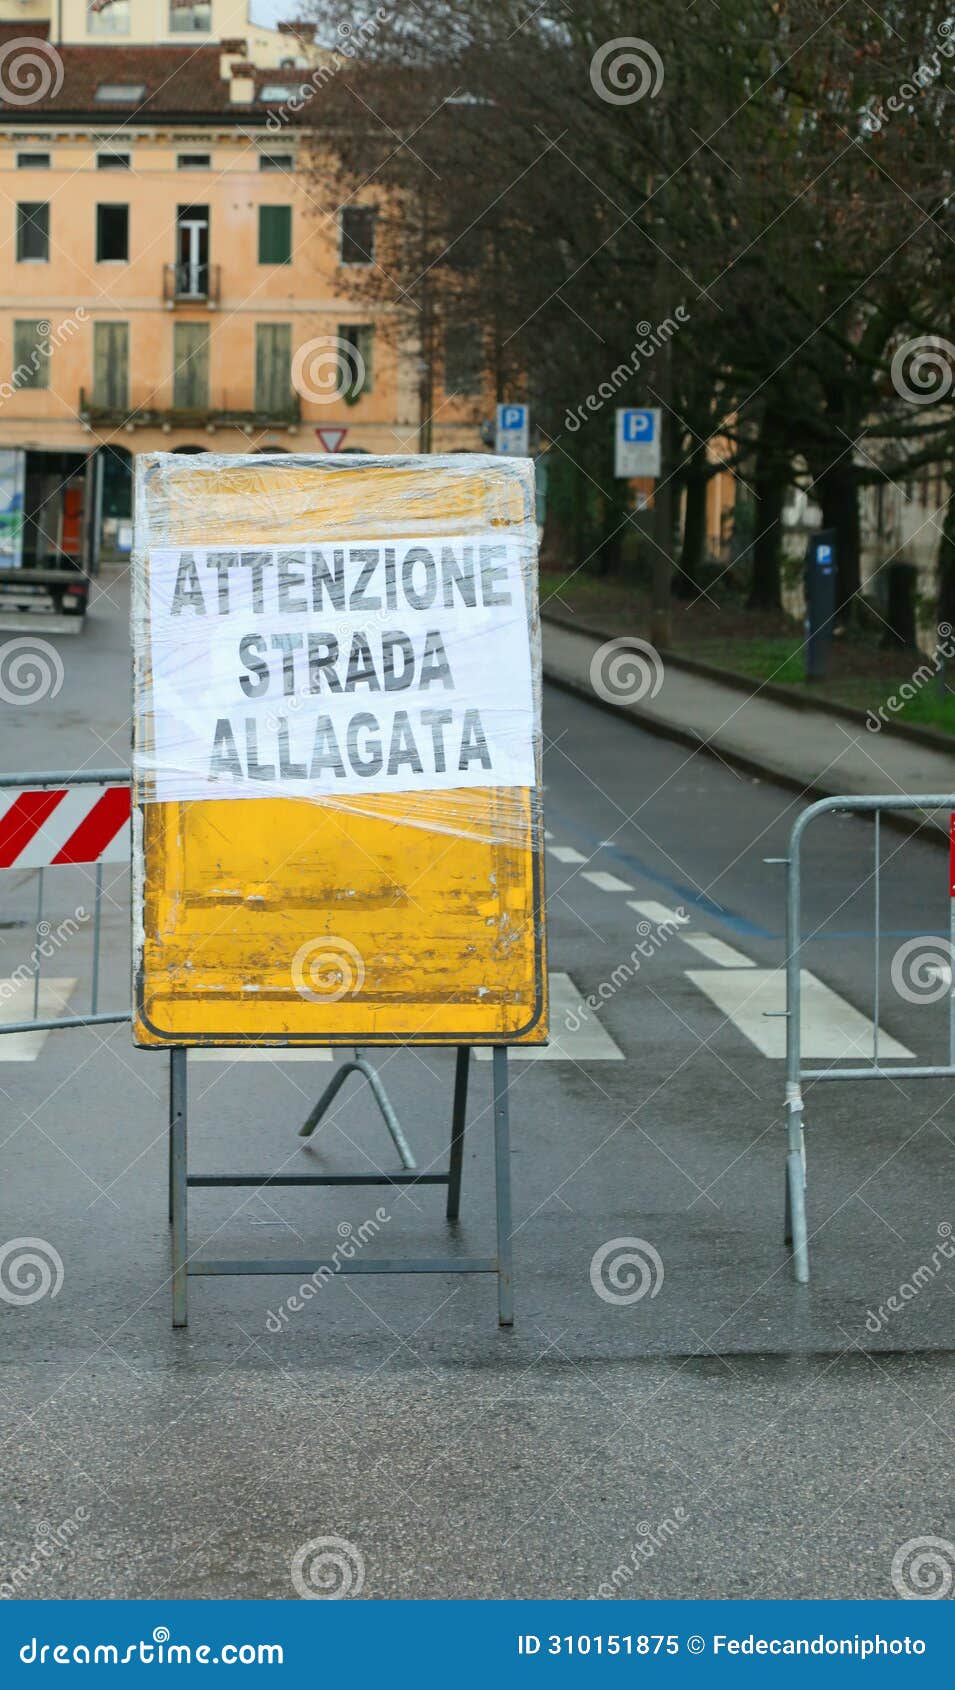 warning sign with text attenzione strada allagata in italian that means caution flooded road